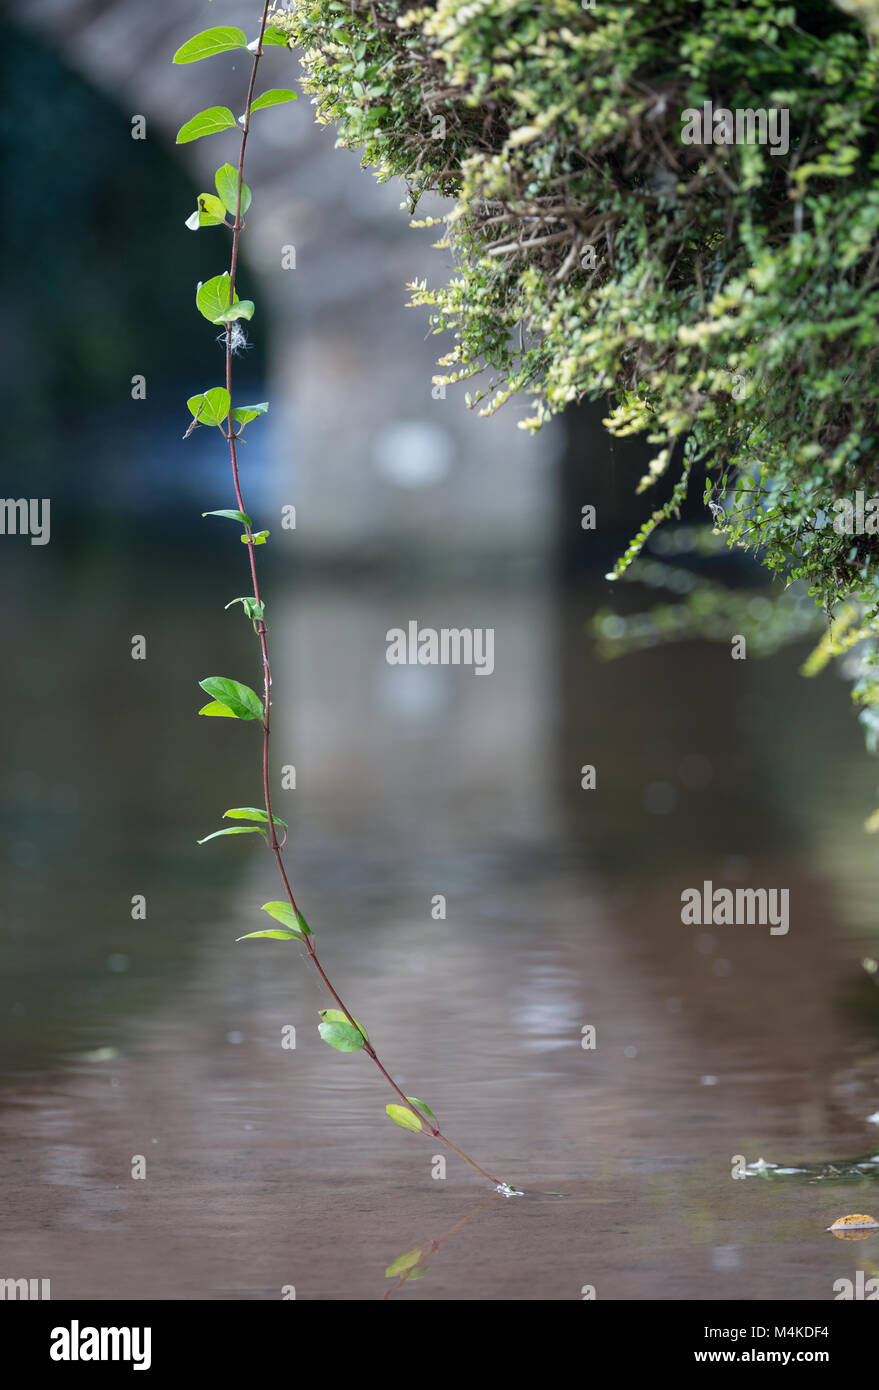 Trailing plant over water with moss and bridge out of focus in background Stock Photo